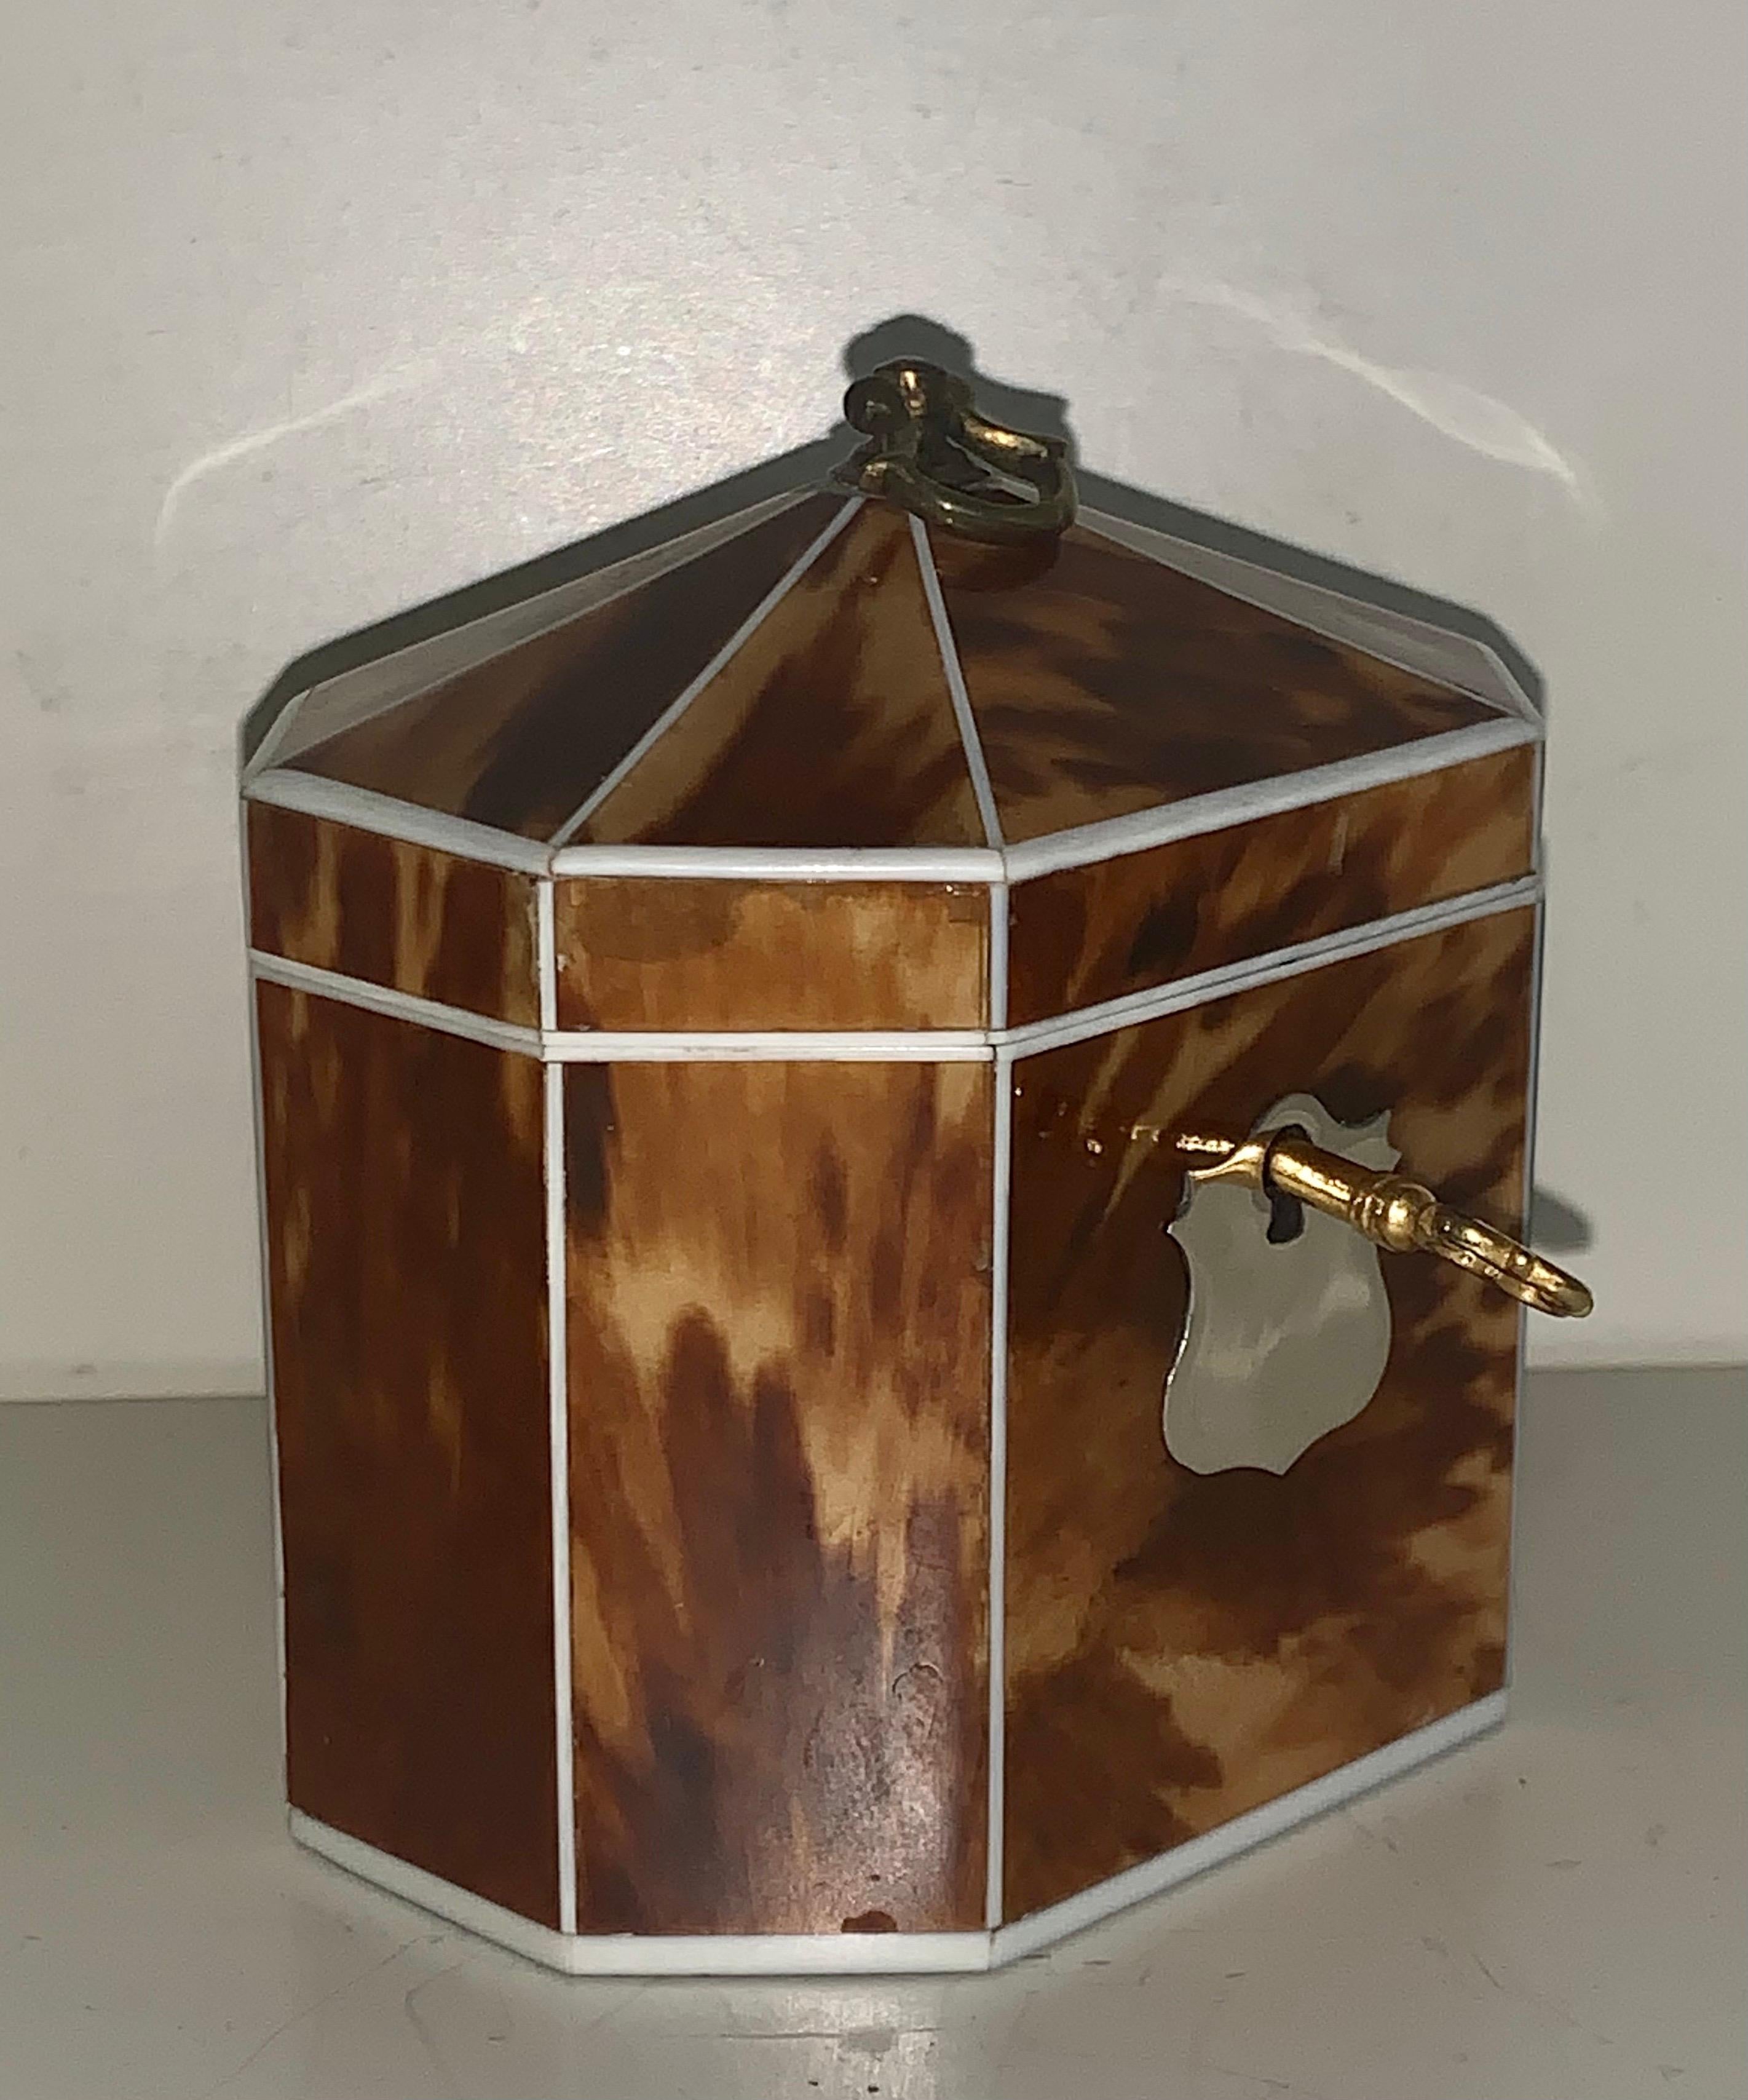 A Very elegant and rare blonde tortoiseshell tea caddy of decagonal form with silver metal shield shape escutcheon. The figuring of the blonde tortoiseshell is well matched throughout. This entire hand crafted caddy with a tent top form lid has a